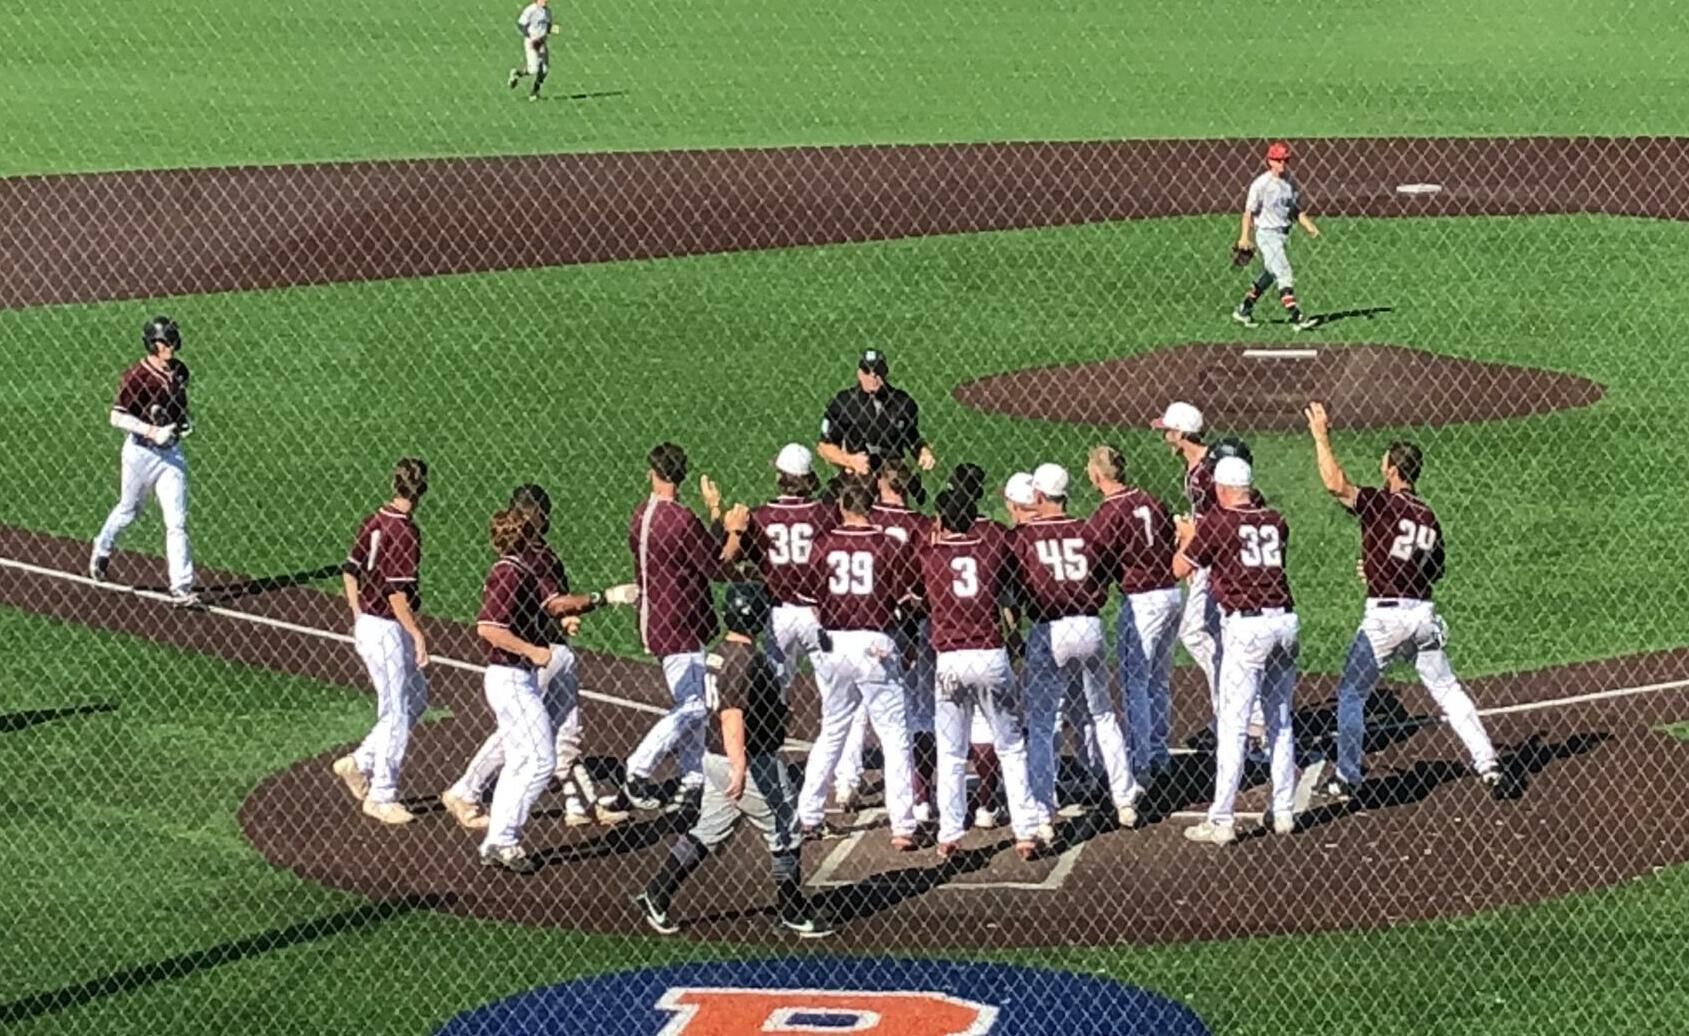 The Ridgefield Raptors await John Peck at home plate after his game-winning home run in the 11th inning against the Walla Walla Sweets on Sunday at Ridgefield Outdoor Recreation Complex.